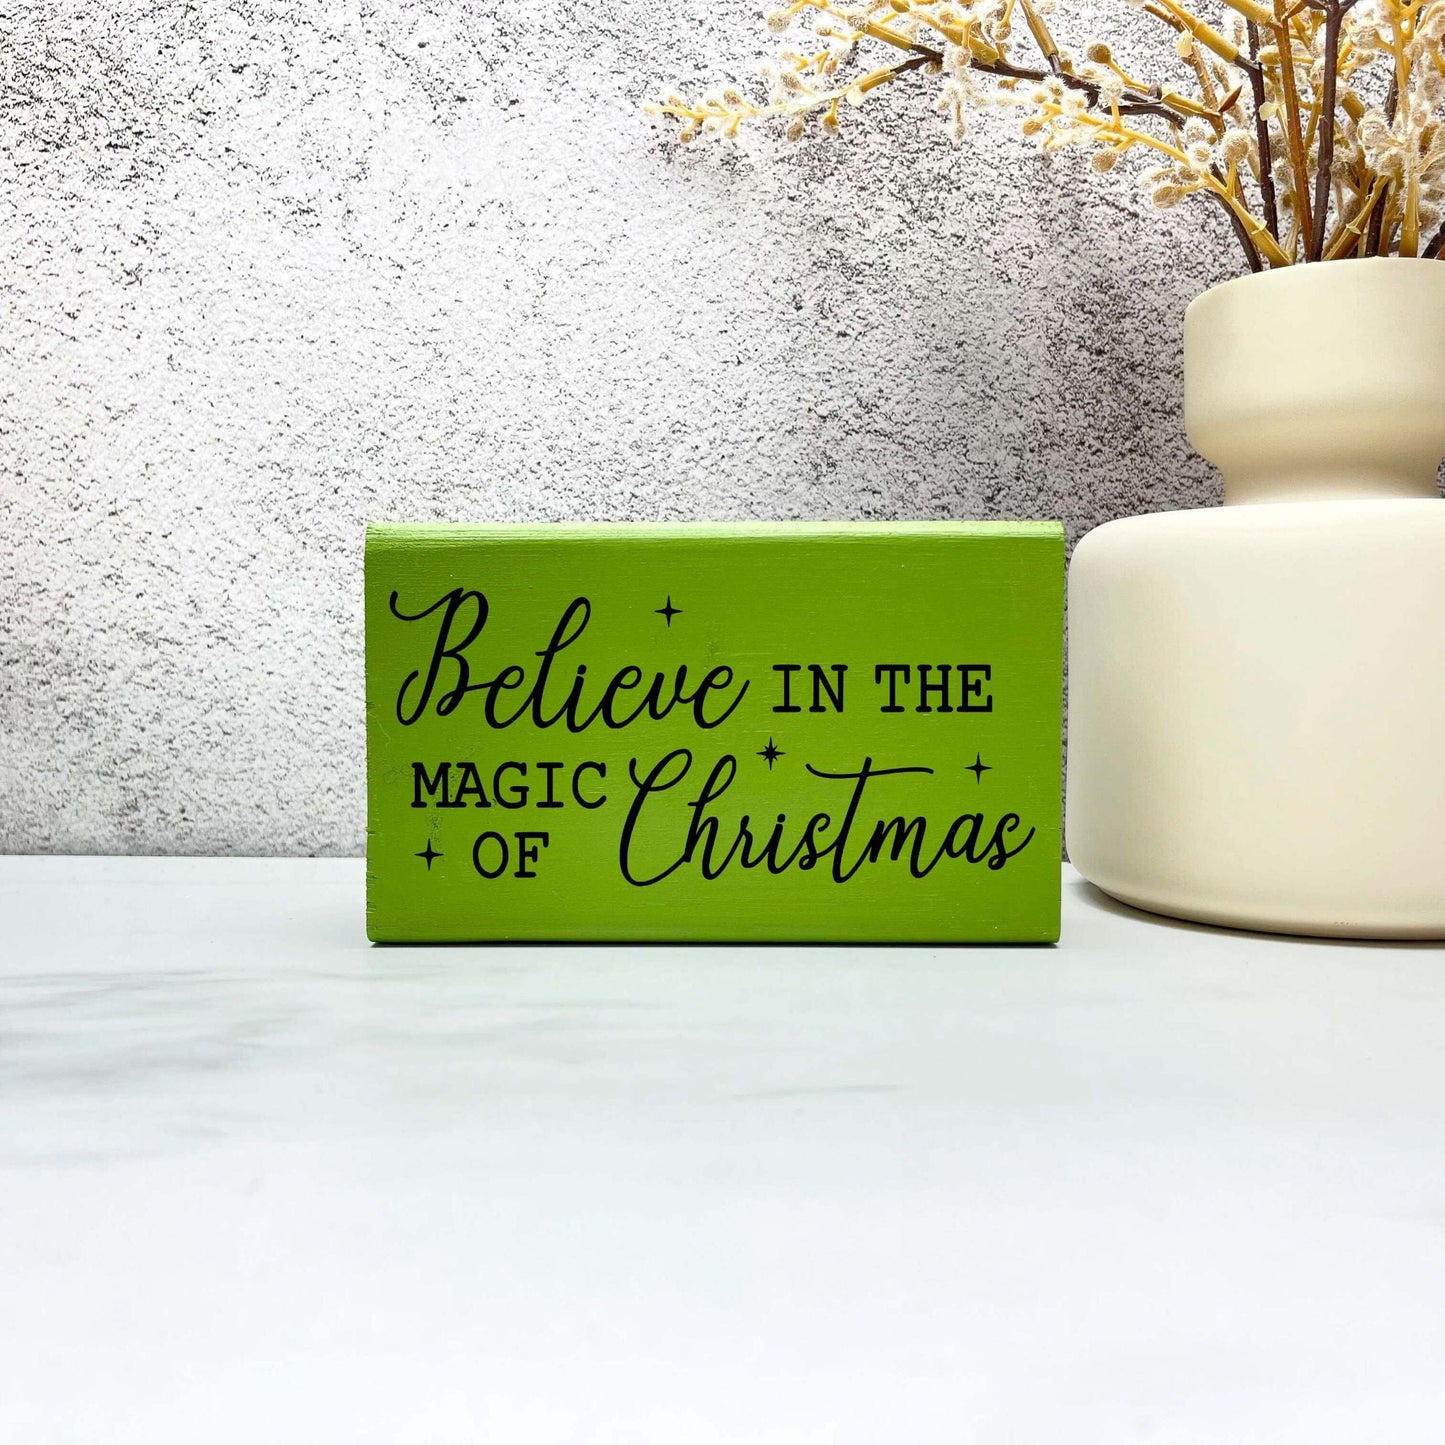 Believe in the magic of Christmas sign, christmas wood signs, christmas decor, home decor